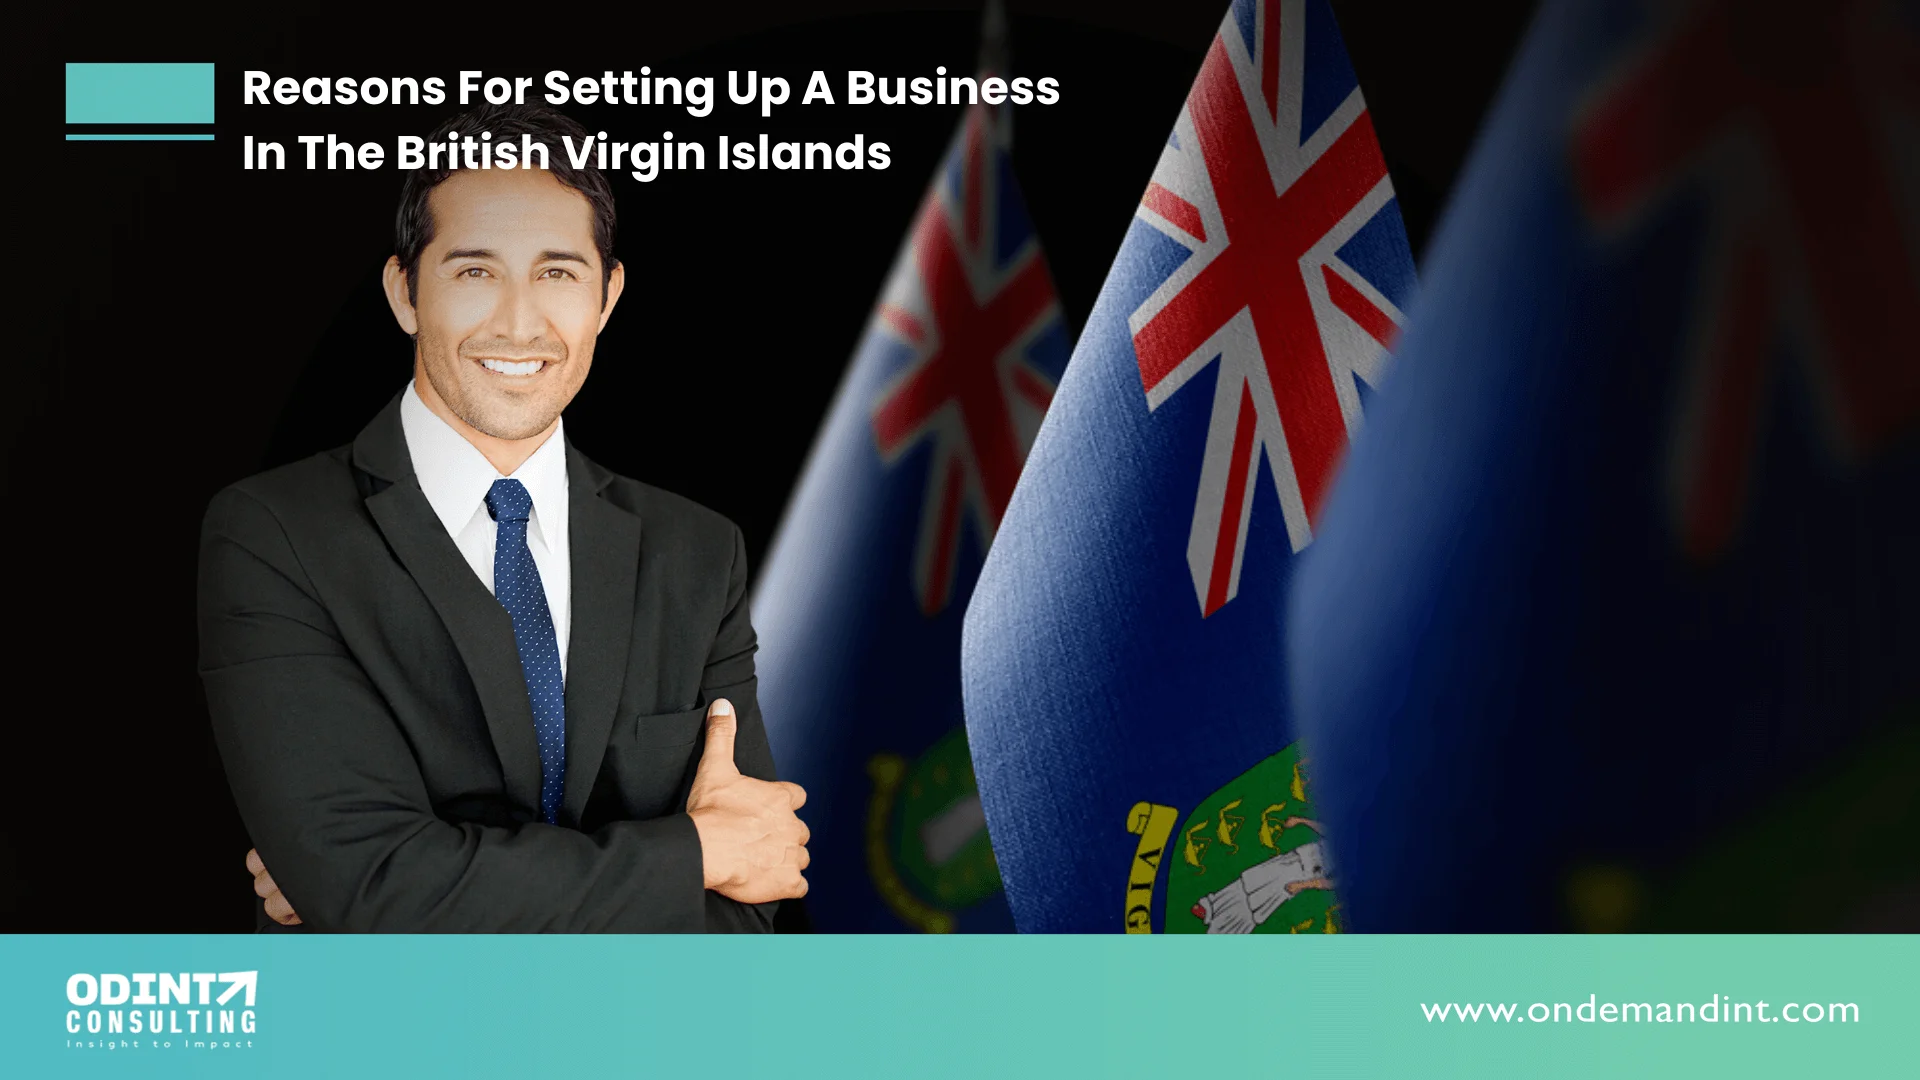 Top 5 Reasons For Setting Up A Business In The British Virgin Islands